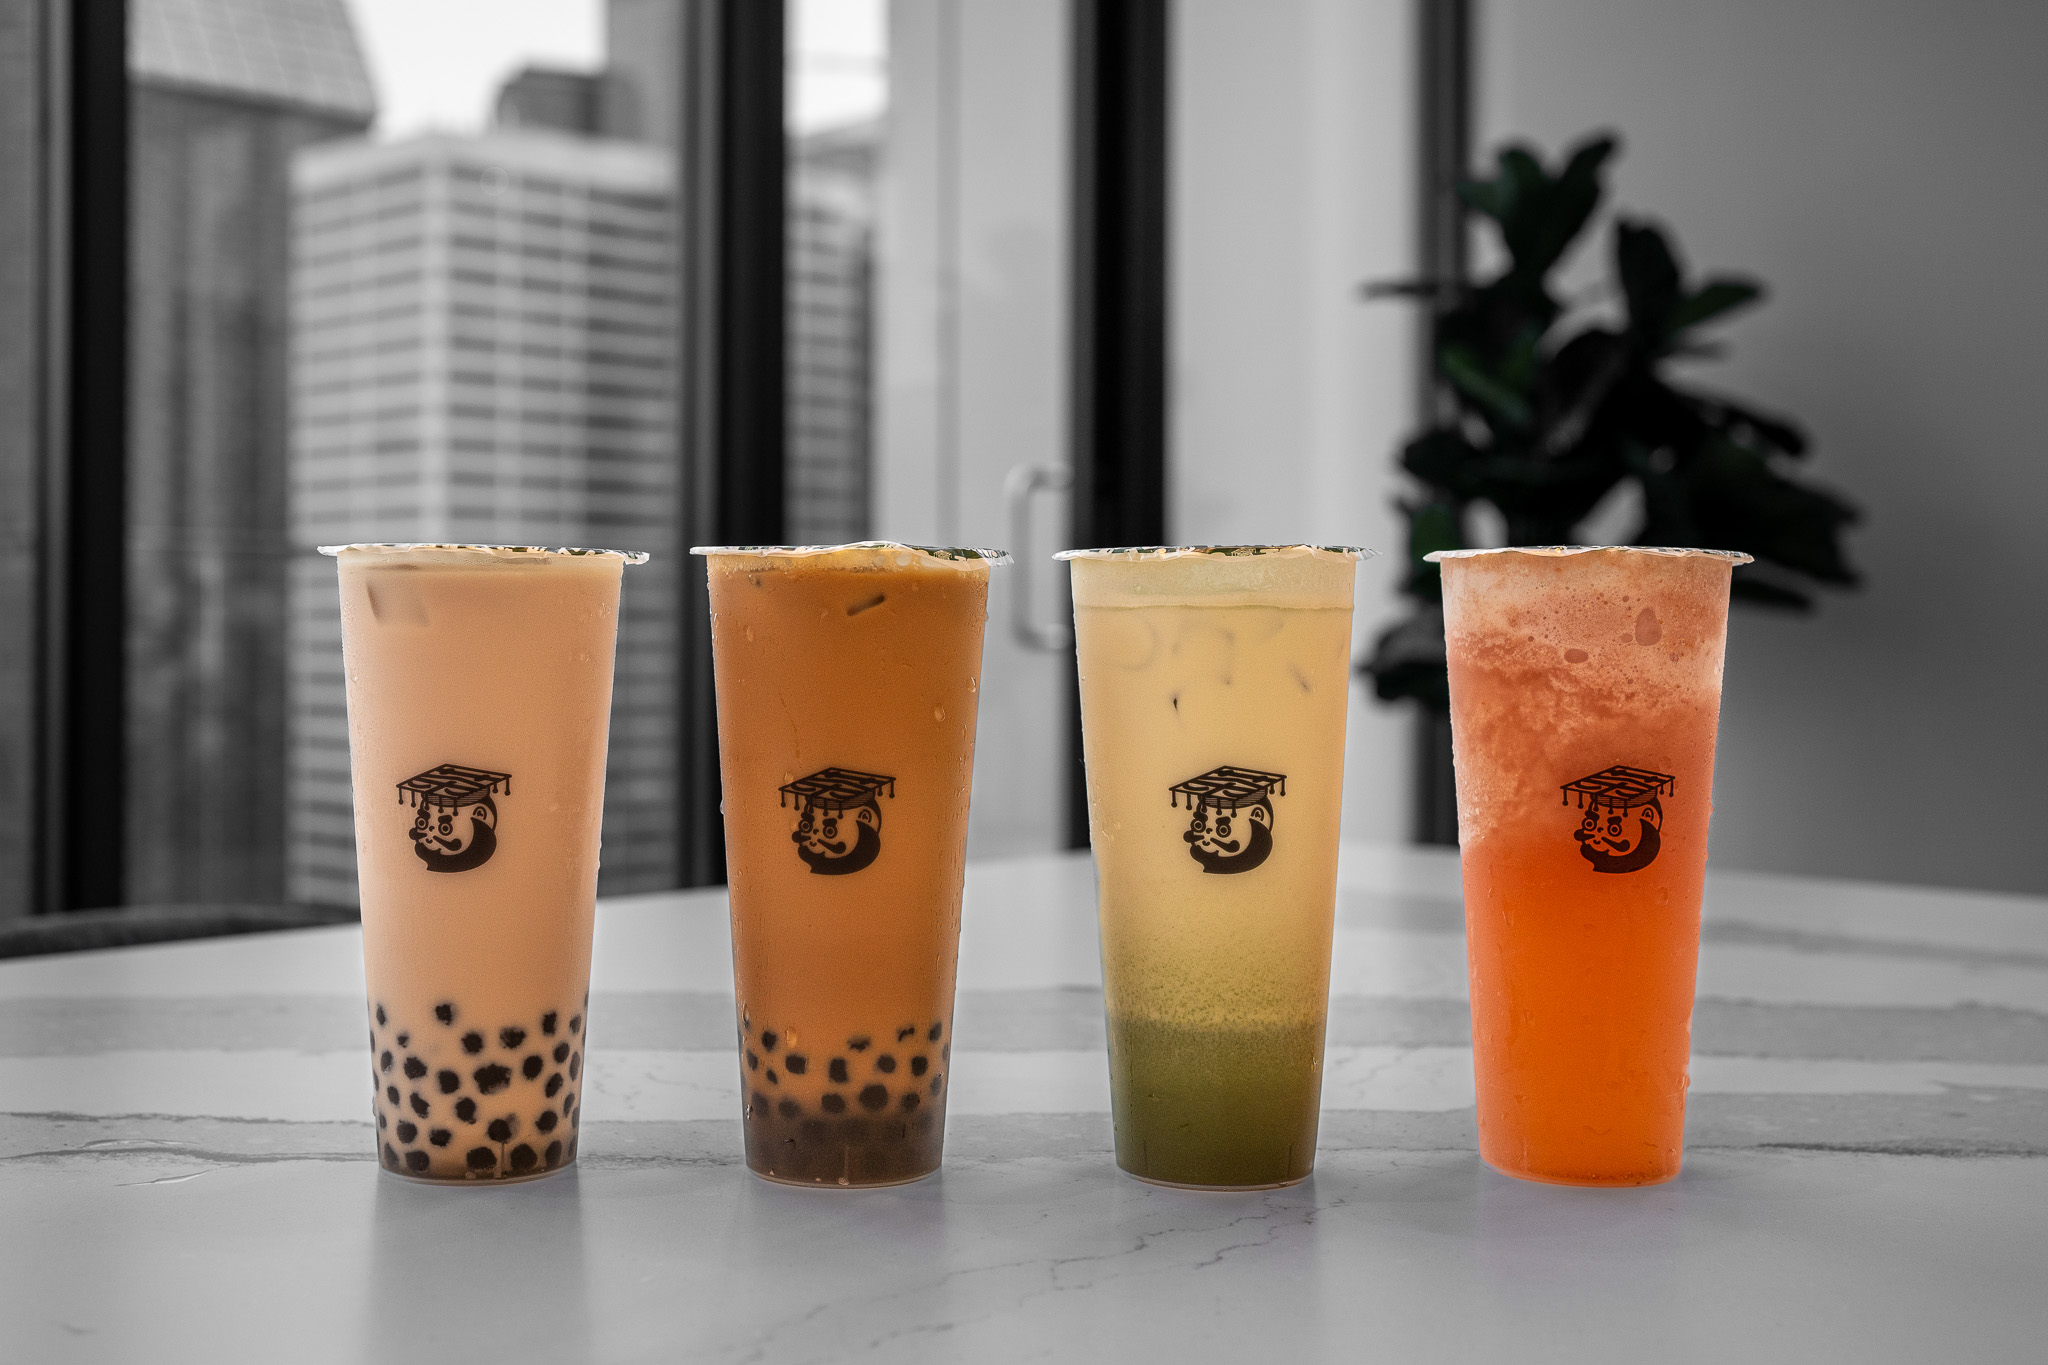 Bubble, Boba Tea Takes Over US As Top Taiwan Food Import